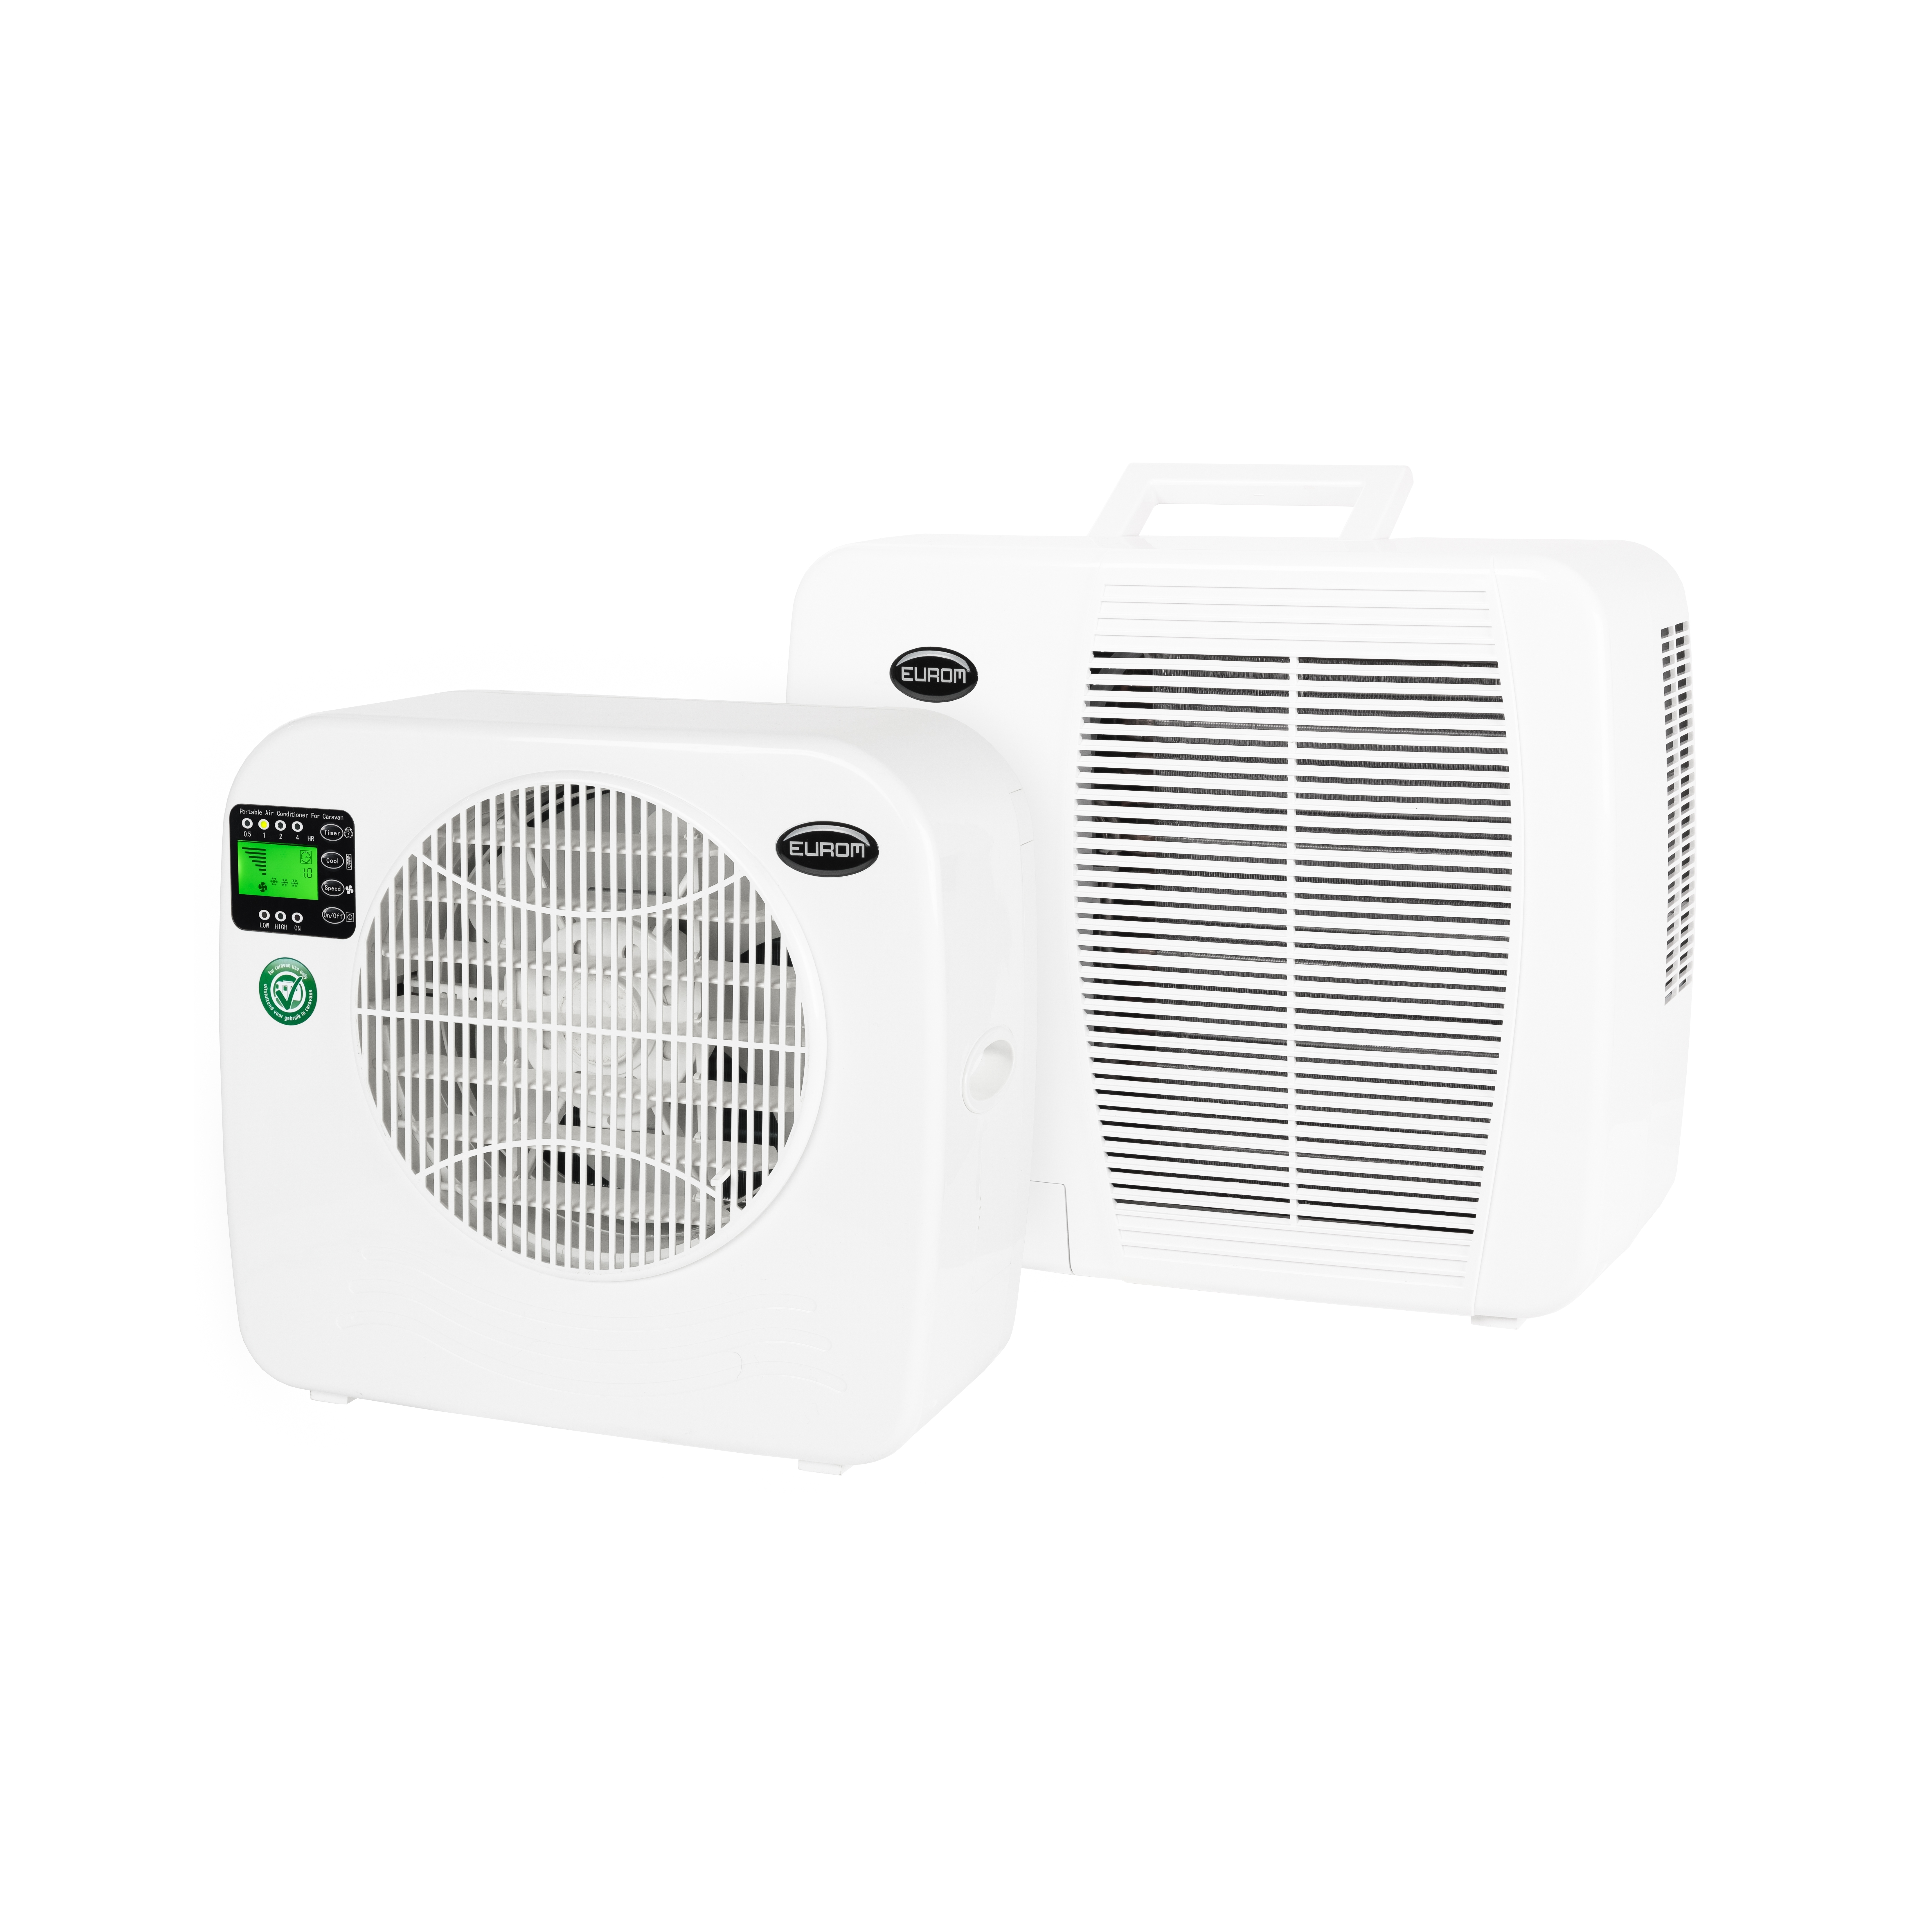 Schilderen bladeren Idool Eurom AC 2401 mobile split airco for caravans | A split air conditioner,  the most ideal mobile air conditioning system for your caravan or camper! |  KIIP.shop